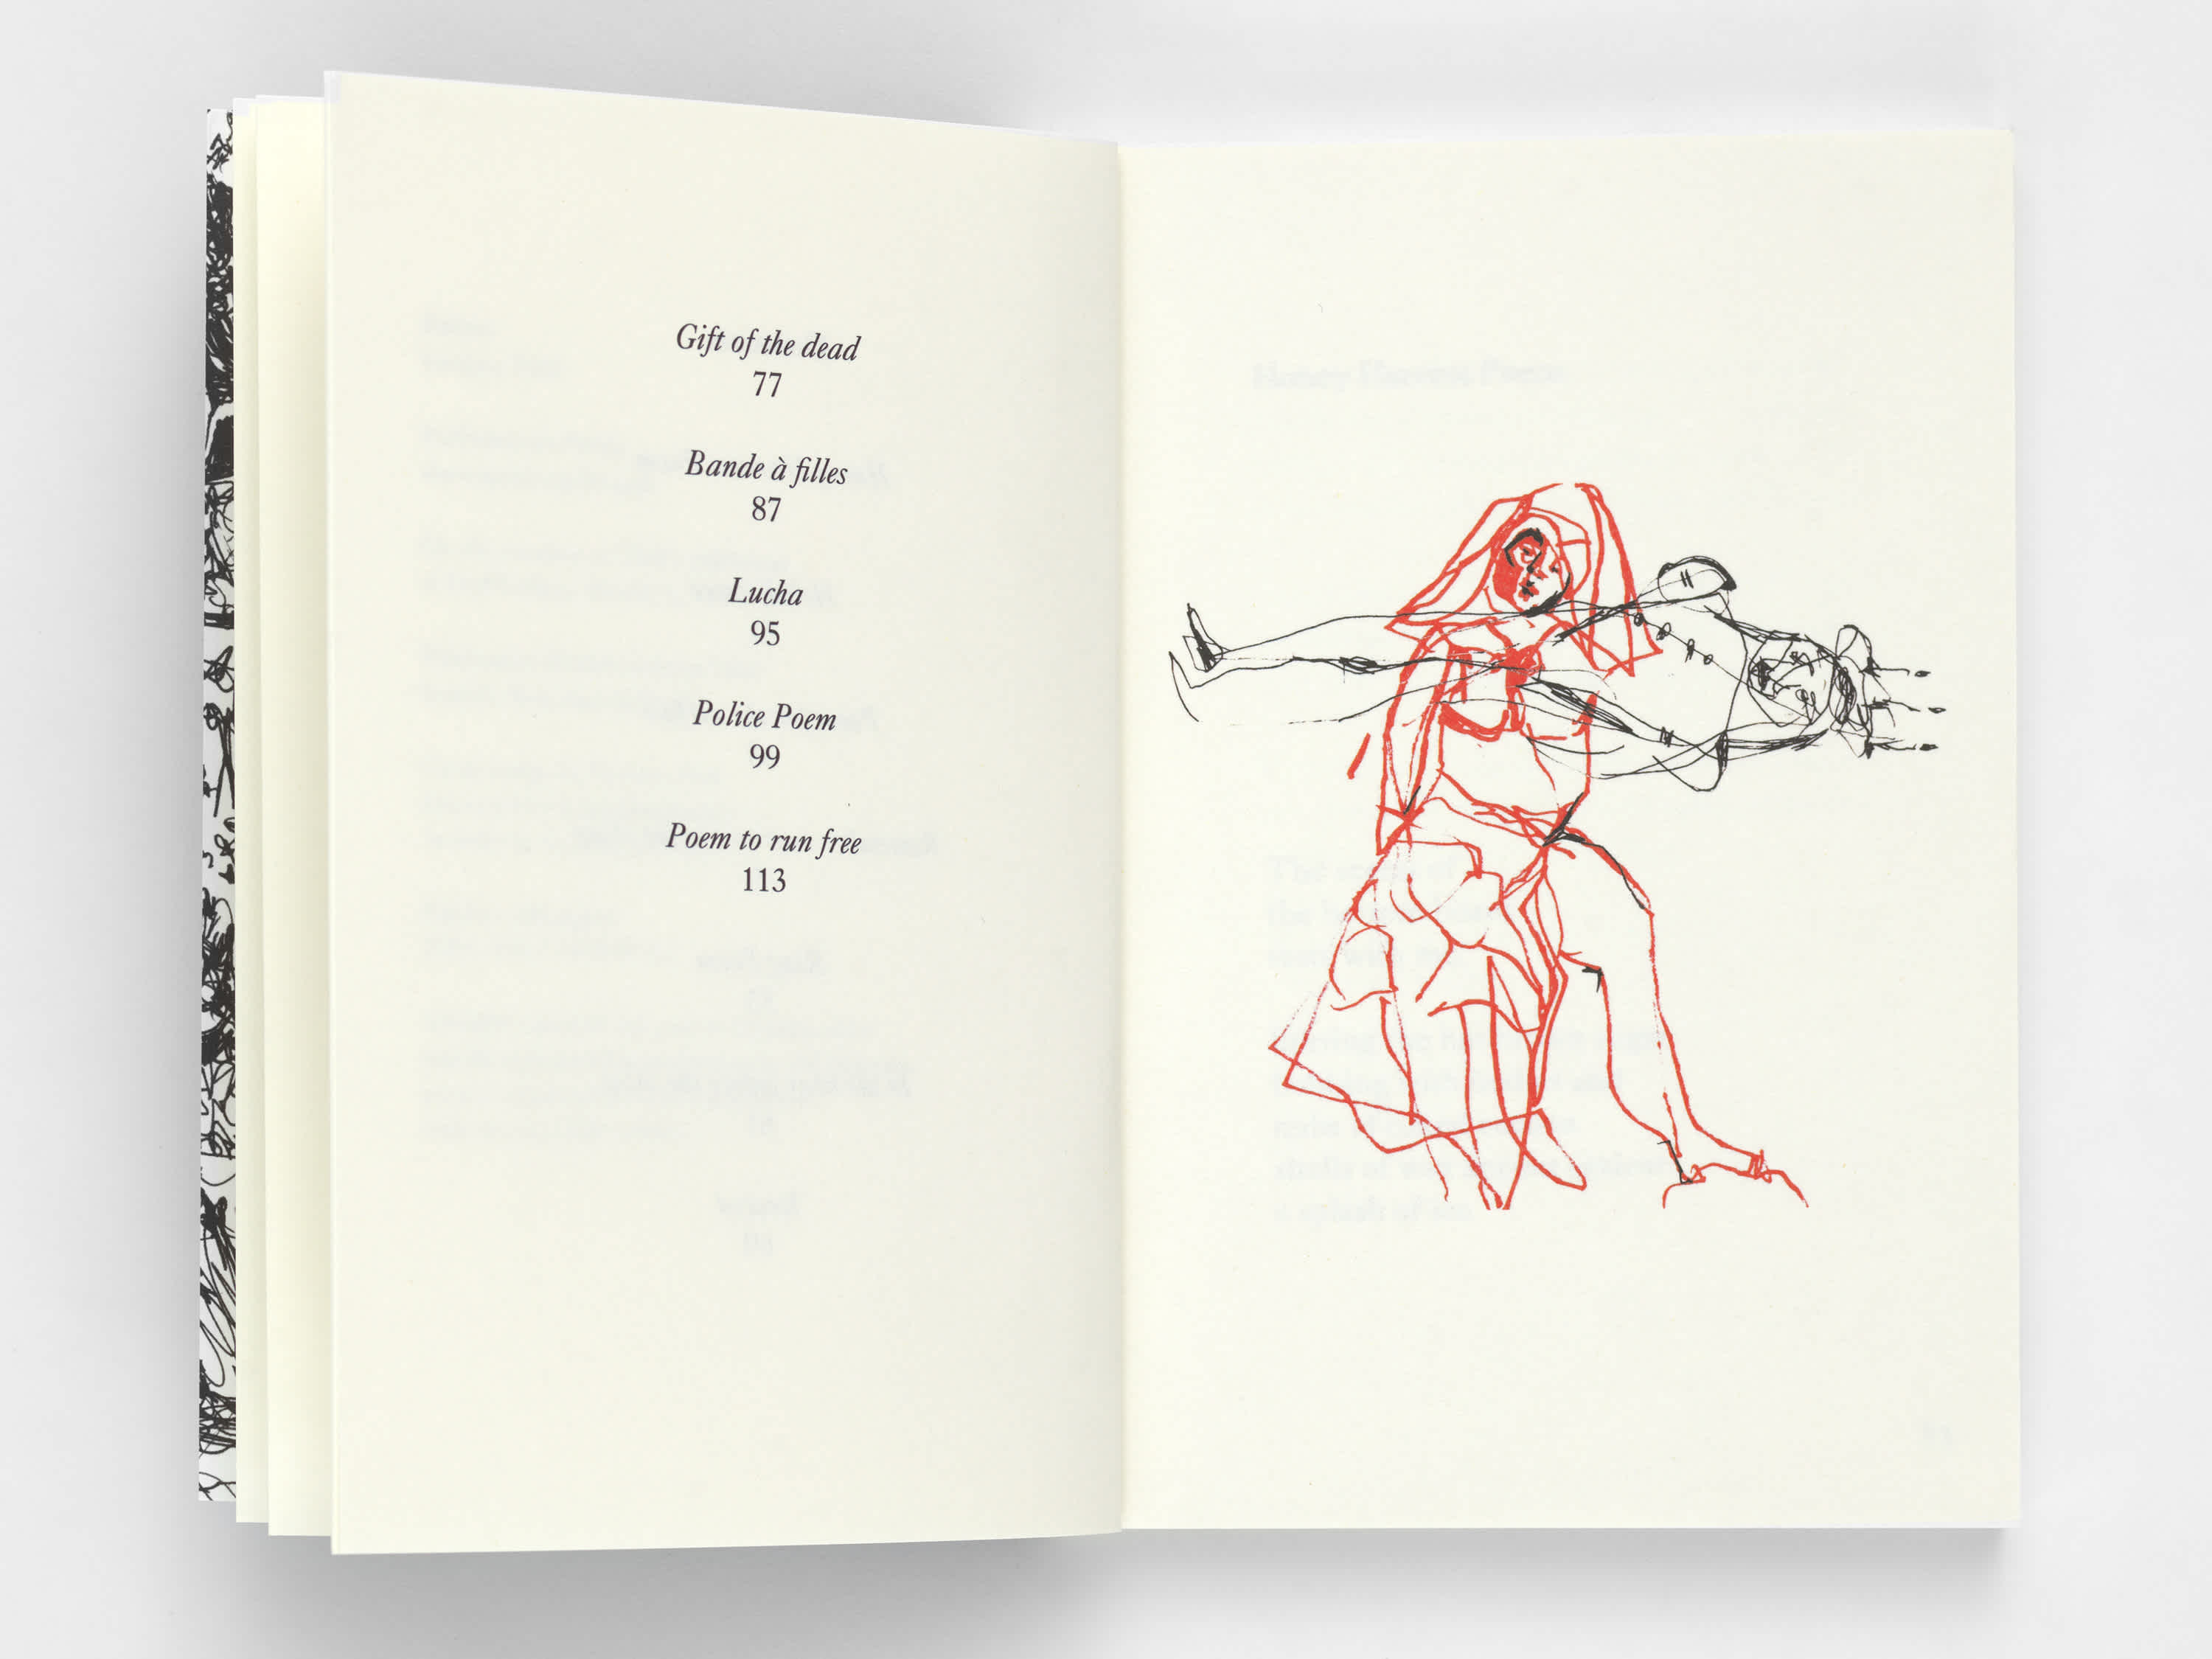 Open book with table of contents on the left page and a red sketch on the right.